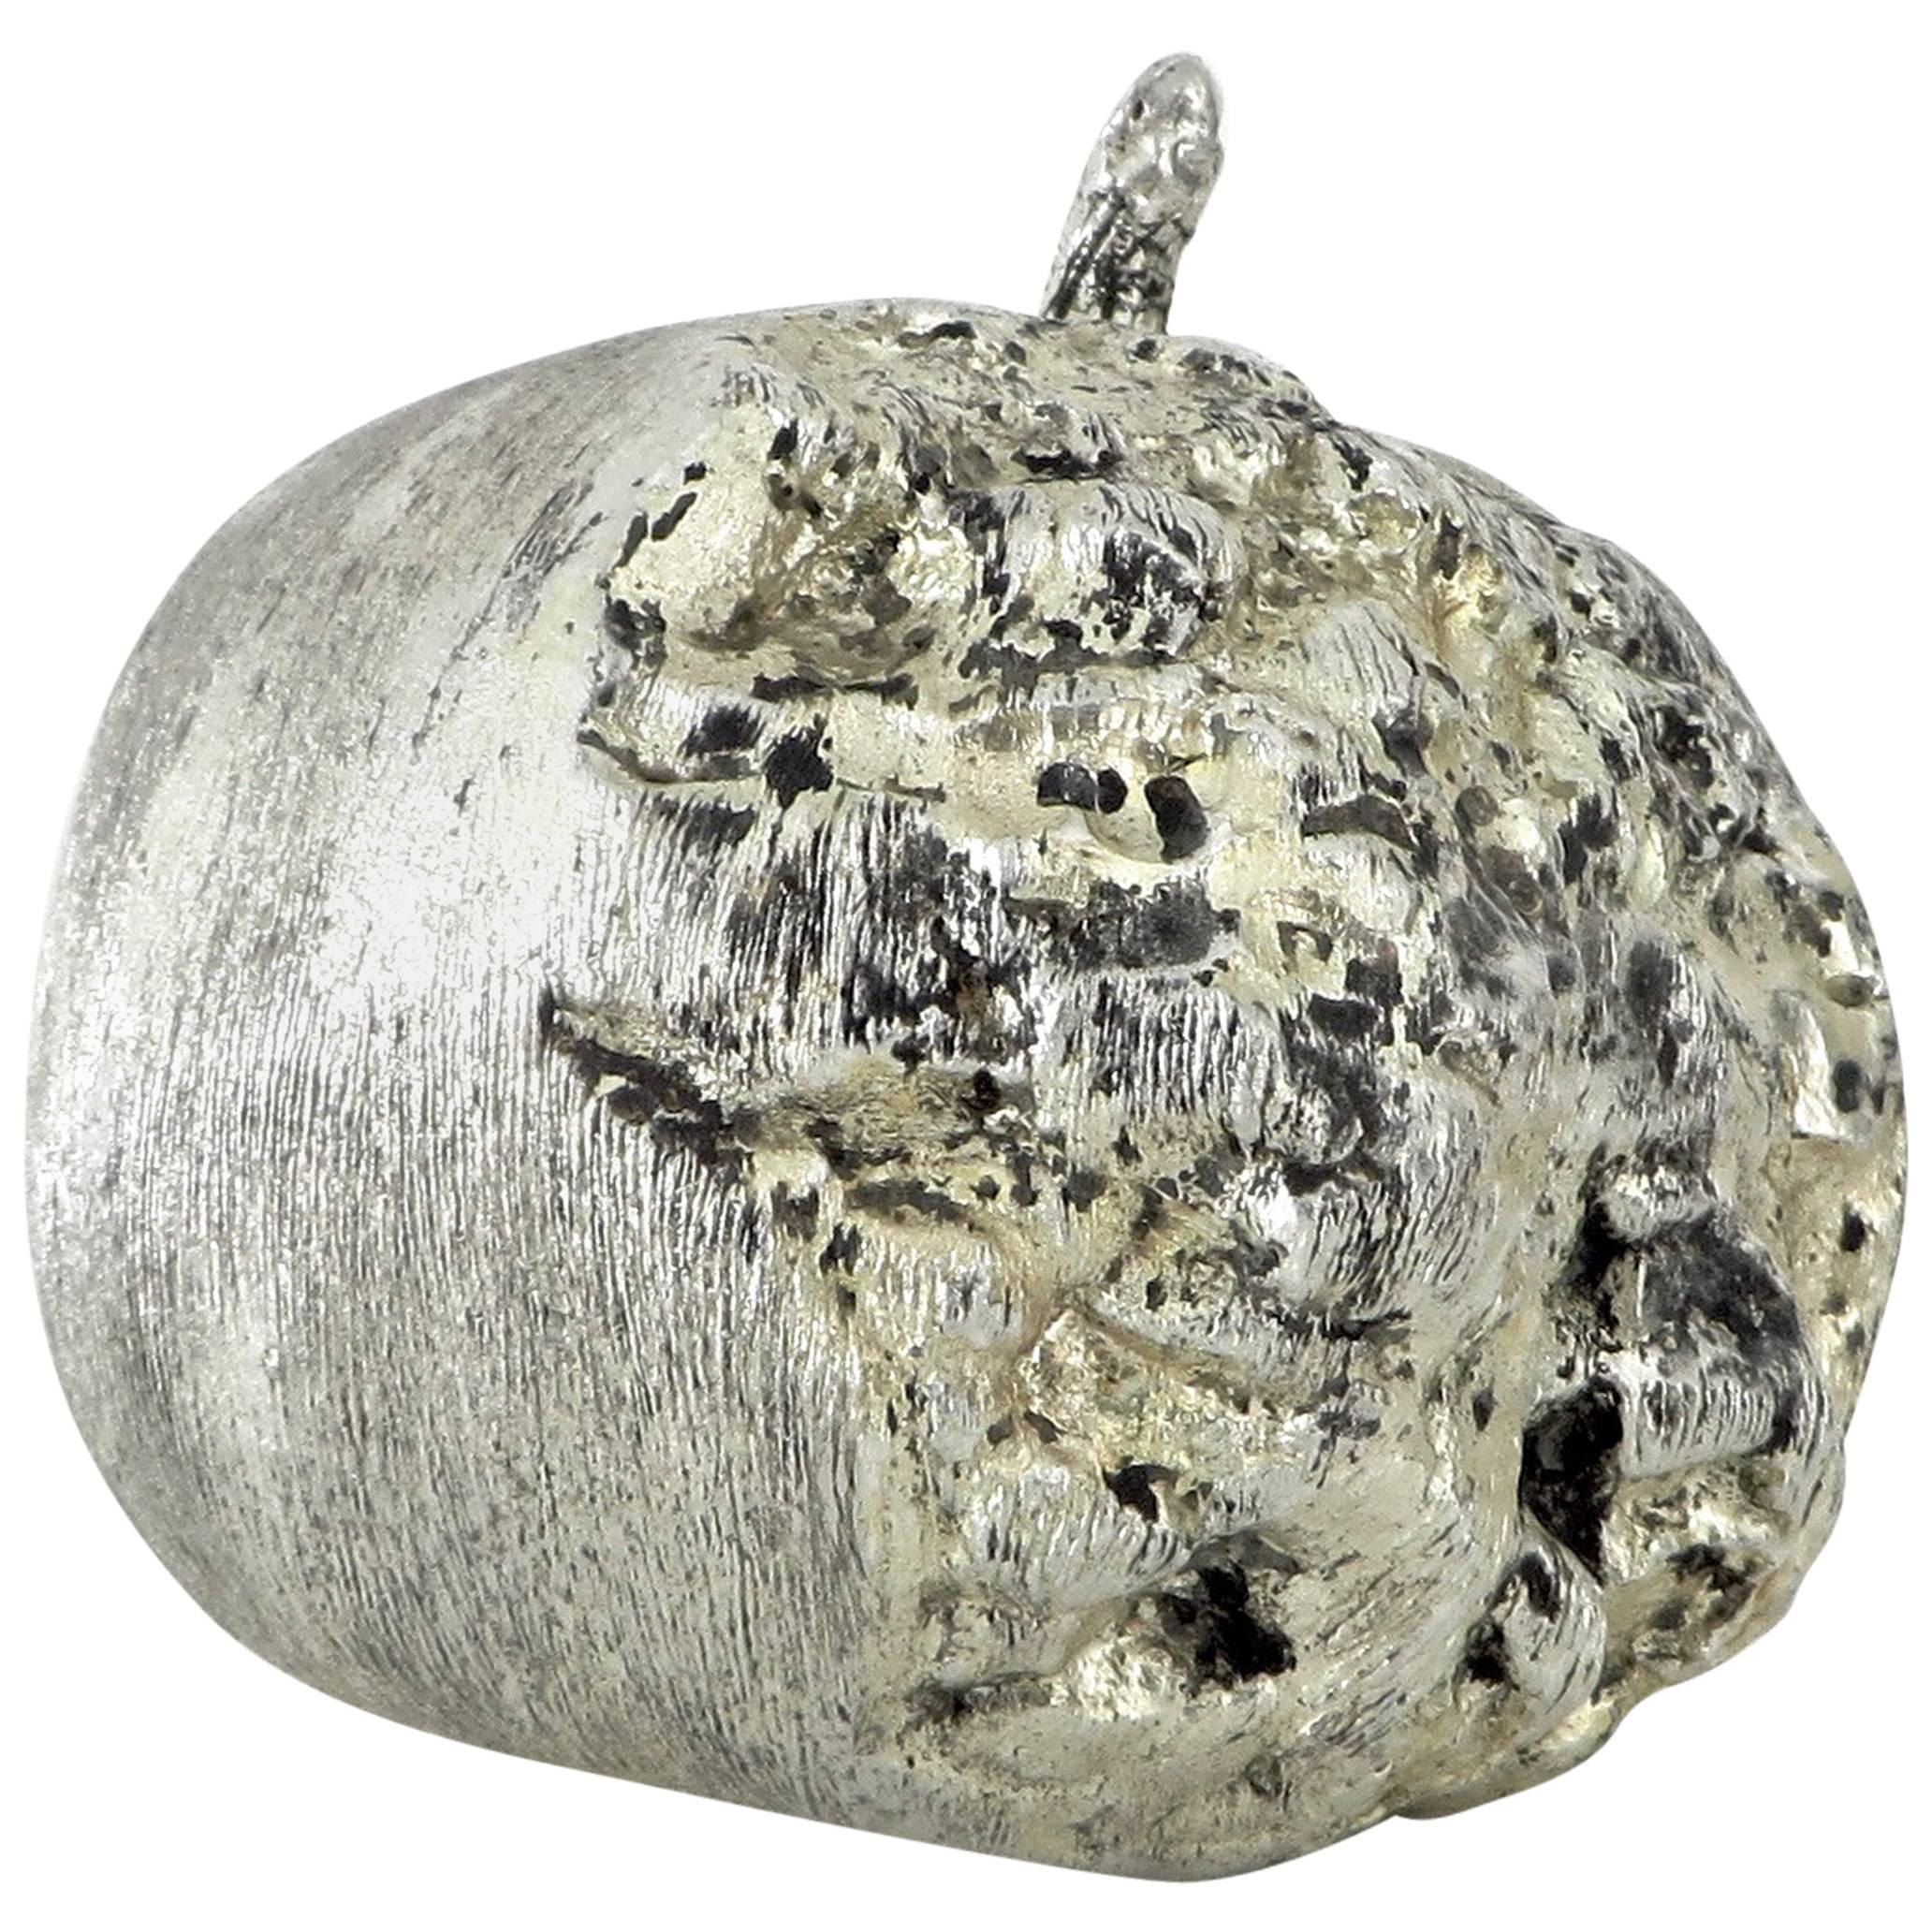 French Sculpture of a Pomegranate in Silver Leafed Bronze